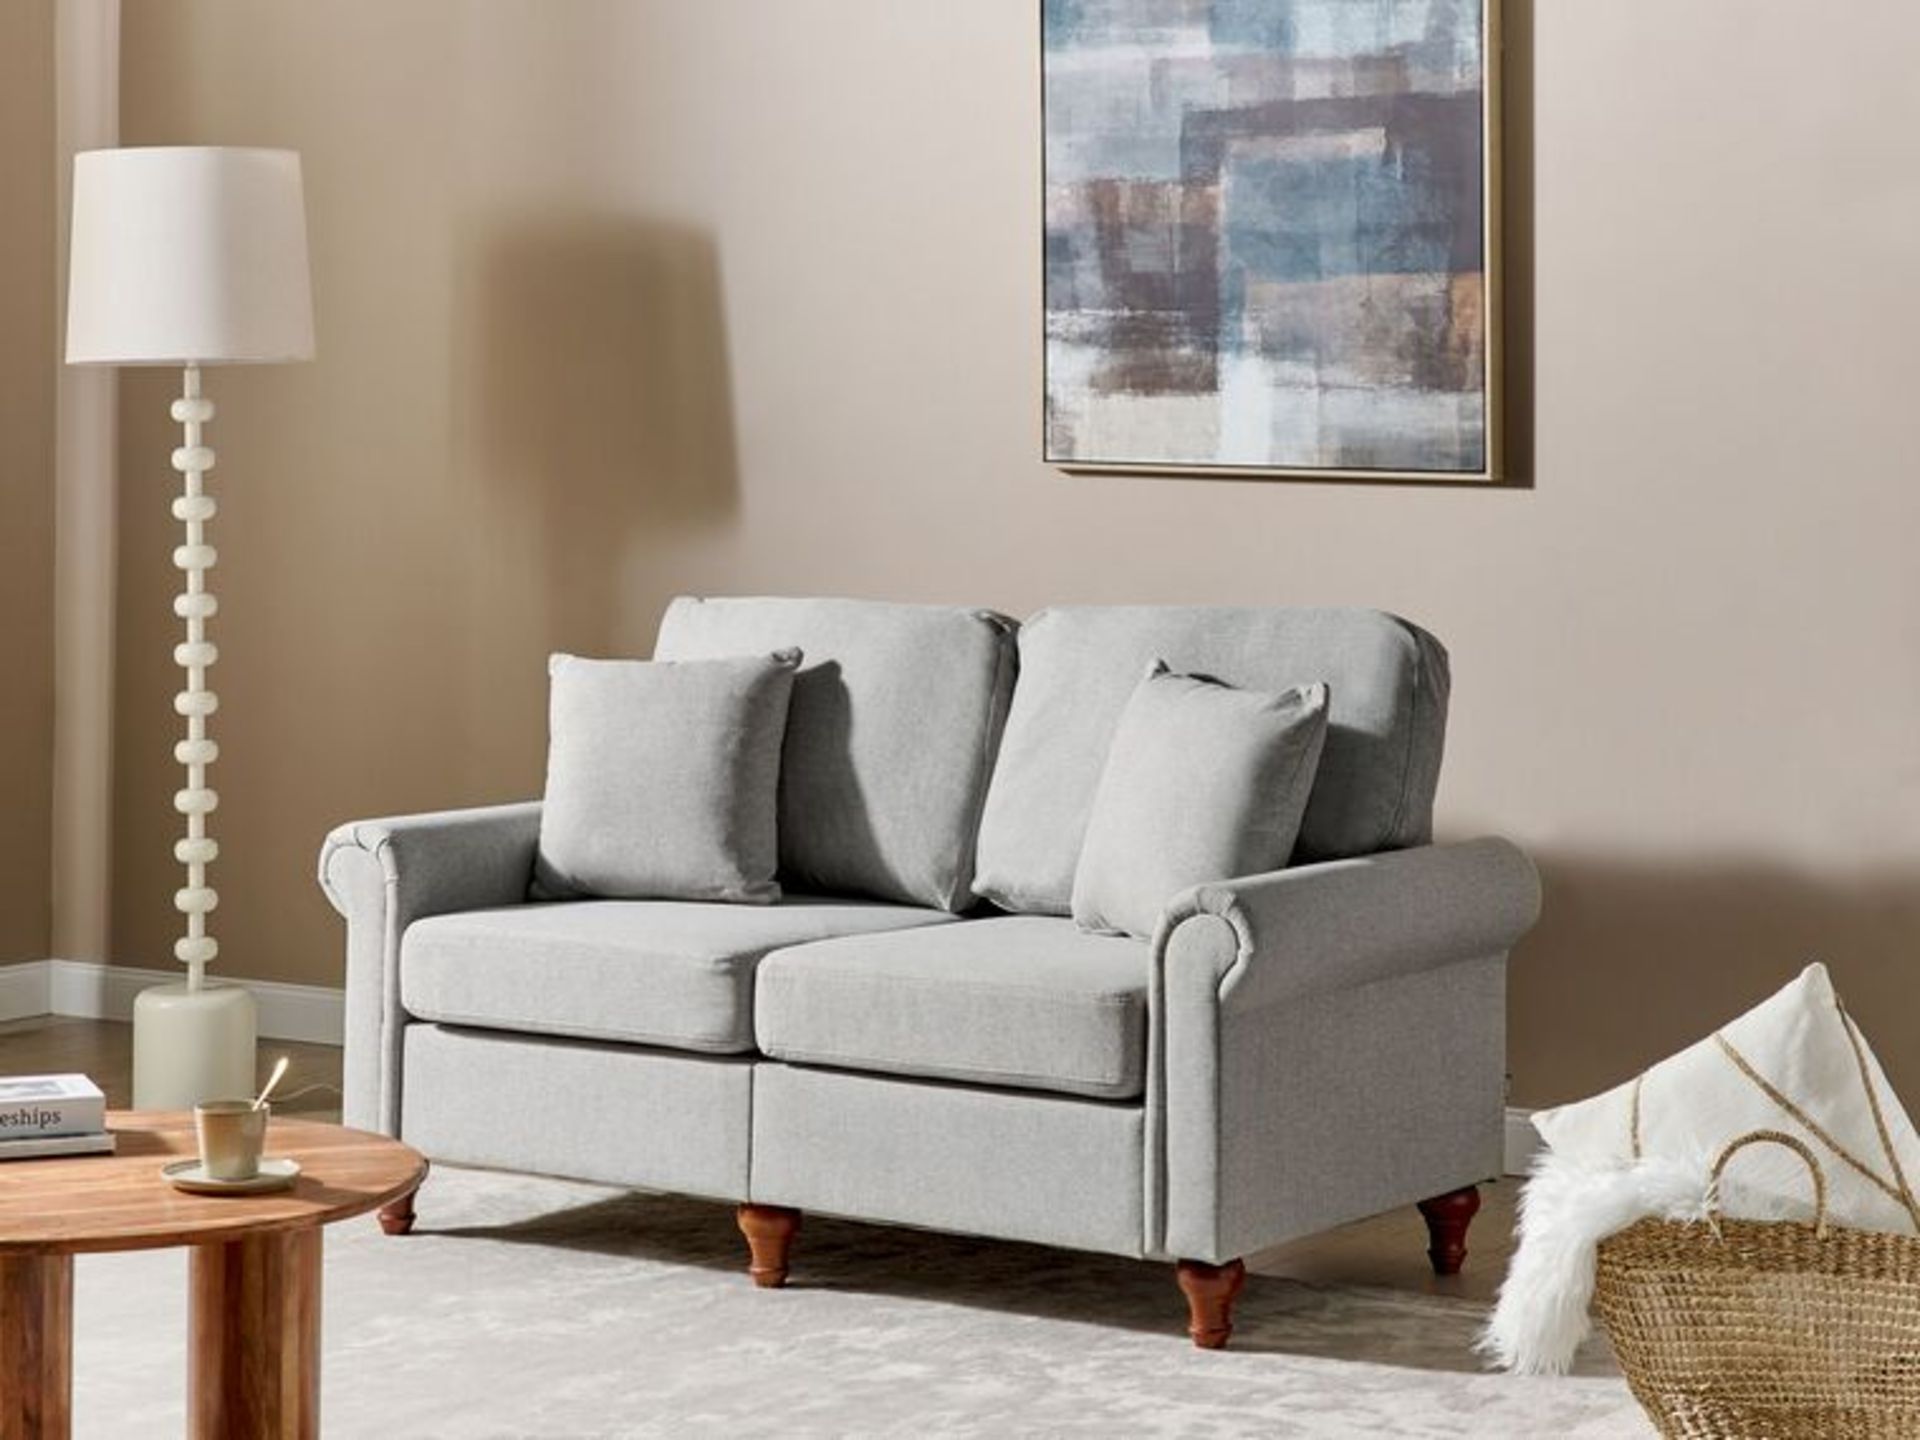 Ginnerup 2 Seater Fabric Sofa Light Grey. - R14. RRP £629.99. A modern 2-seater sofa with a - Image 2 of 2